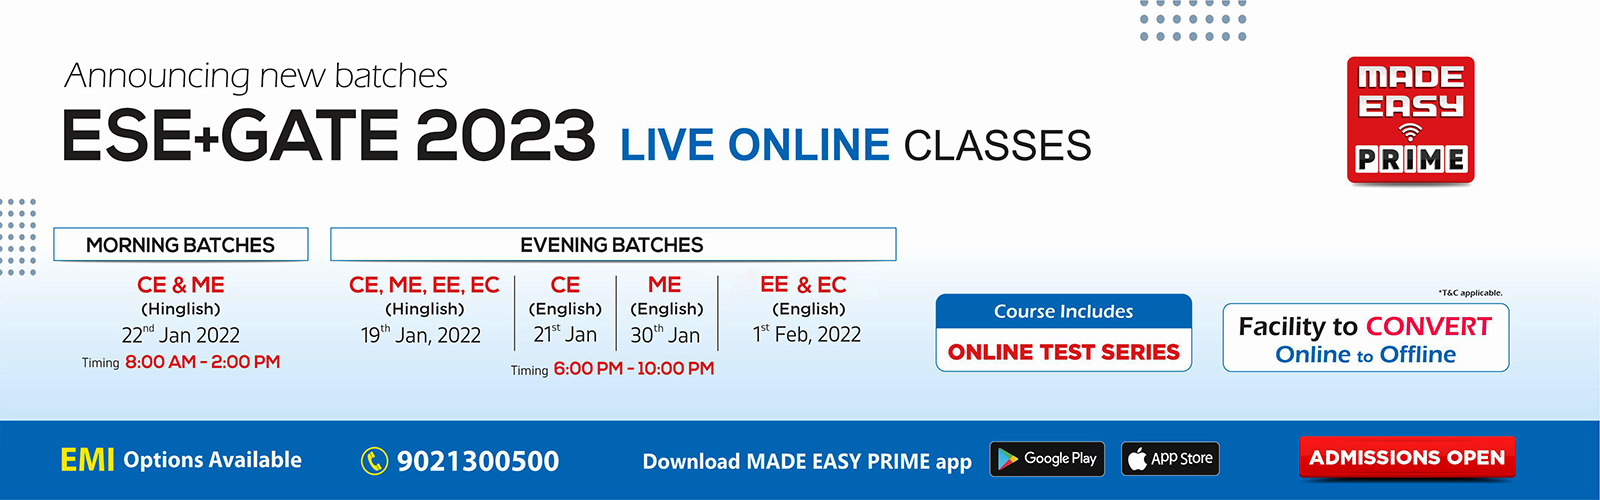 Online-Course-GATE-ESE-2023